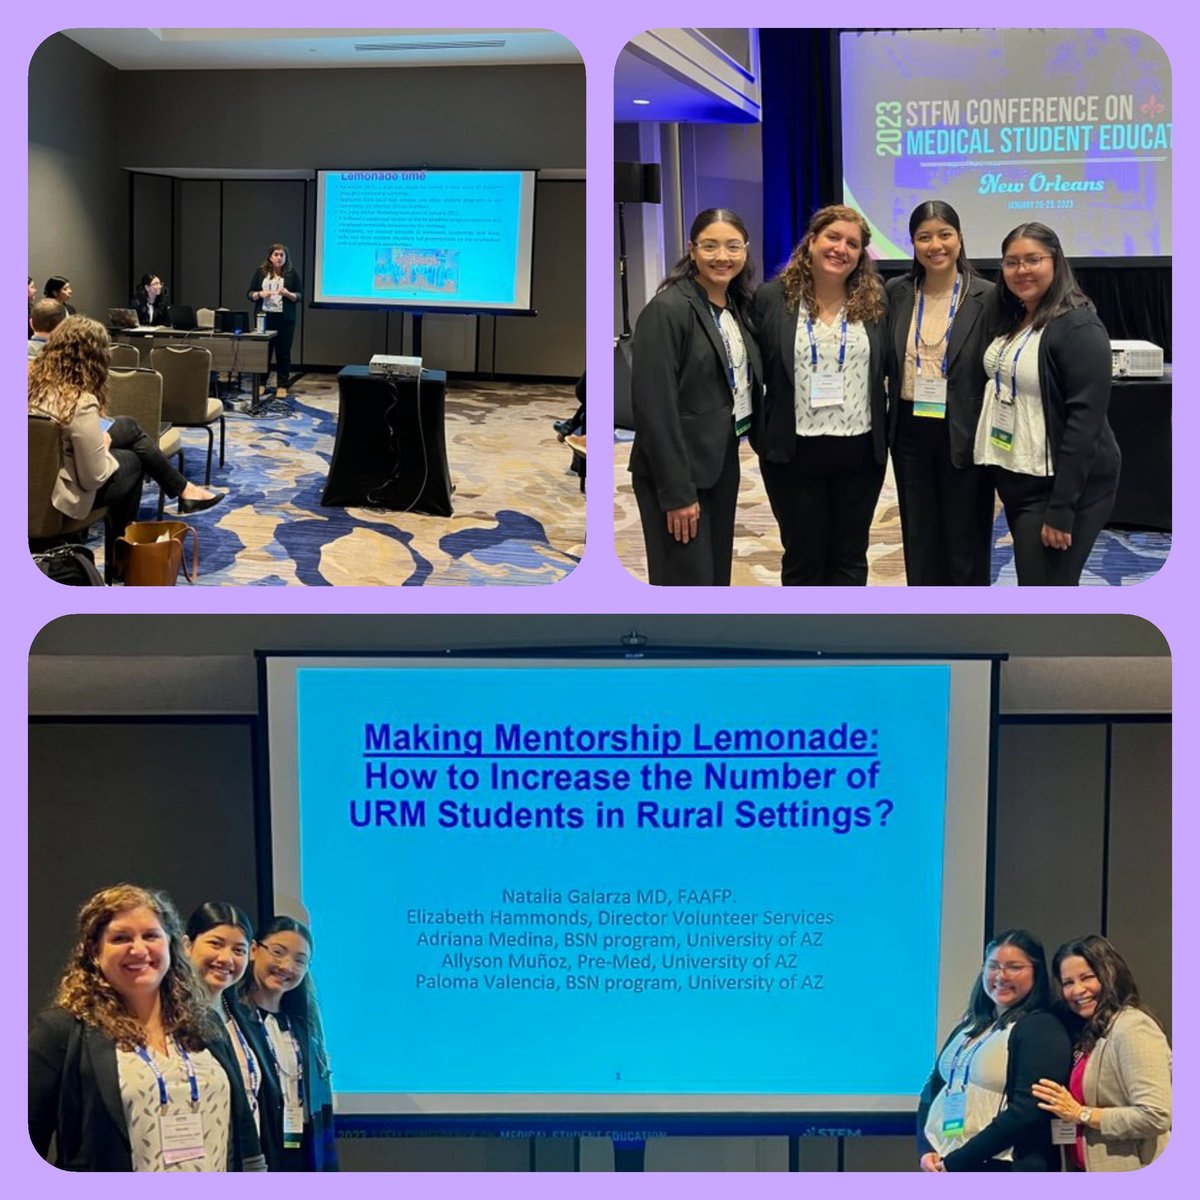 Reached an incredible milestone in our mentorship program where we got to share our at the @STFM_FM conference in New Orleans our great project and 3 of our students mentees were able to join. #familymedicine #FMRevolution #diversity